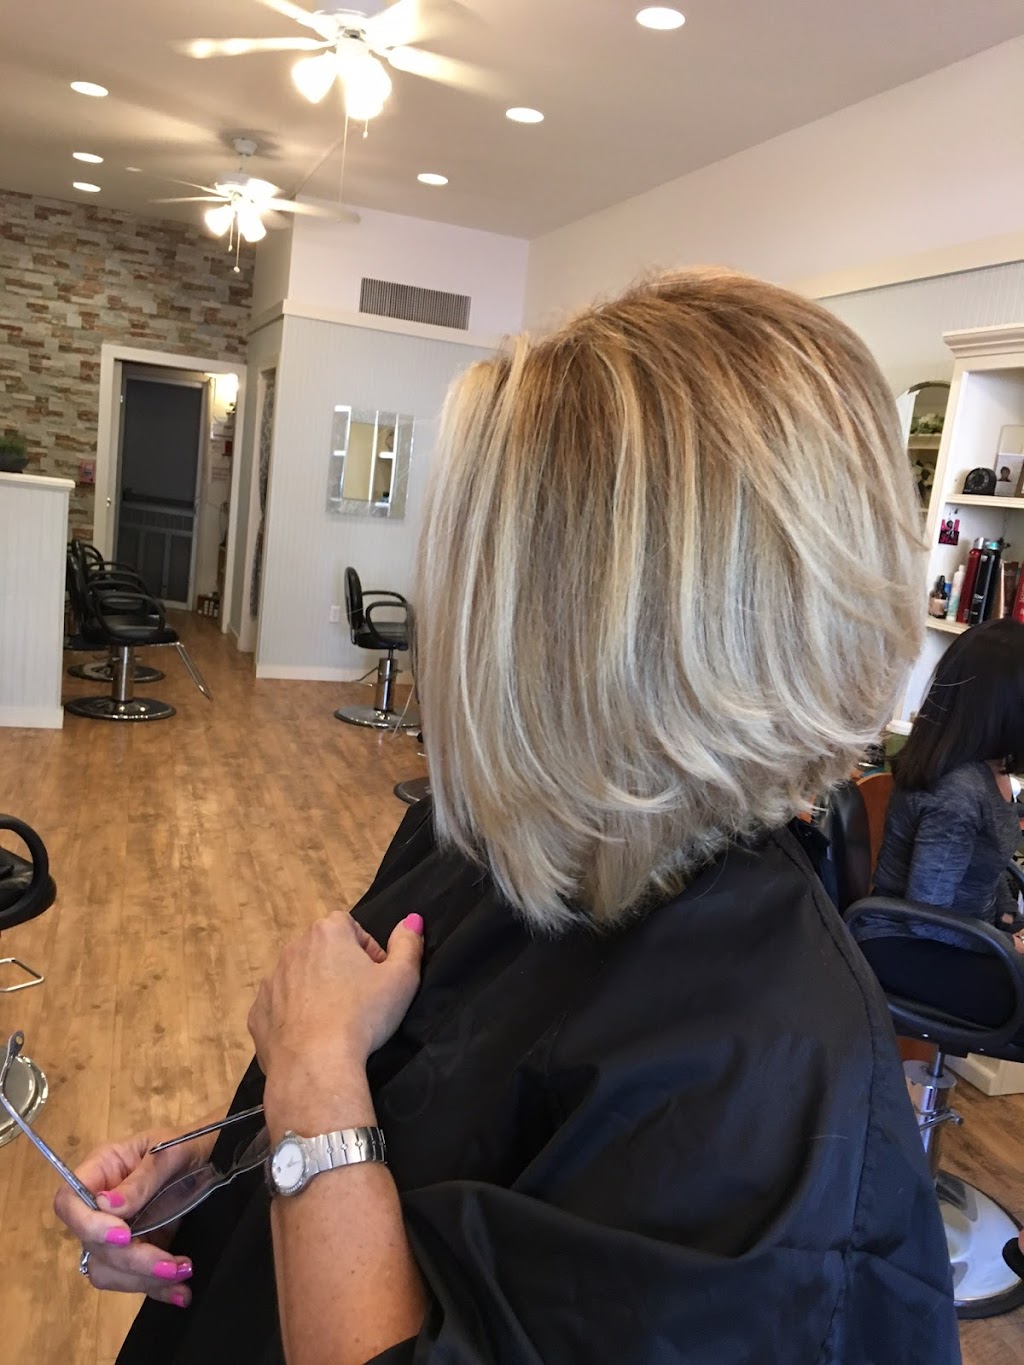 Bedford Village Hair Design | 654 Old Post Rd, Bedford, NY 10506, USA | Phone: (914) 234-7327